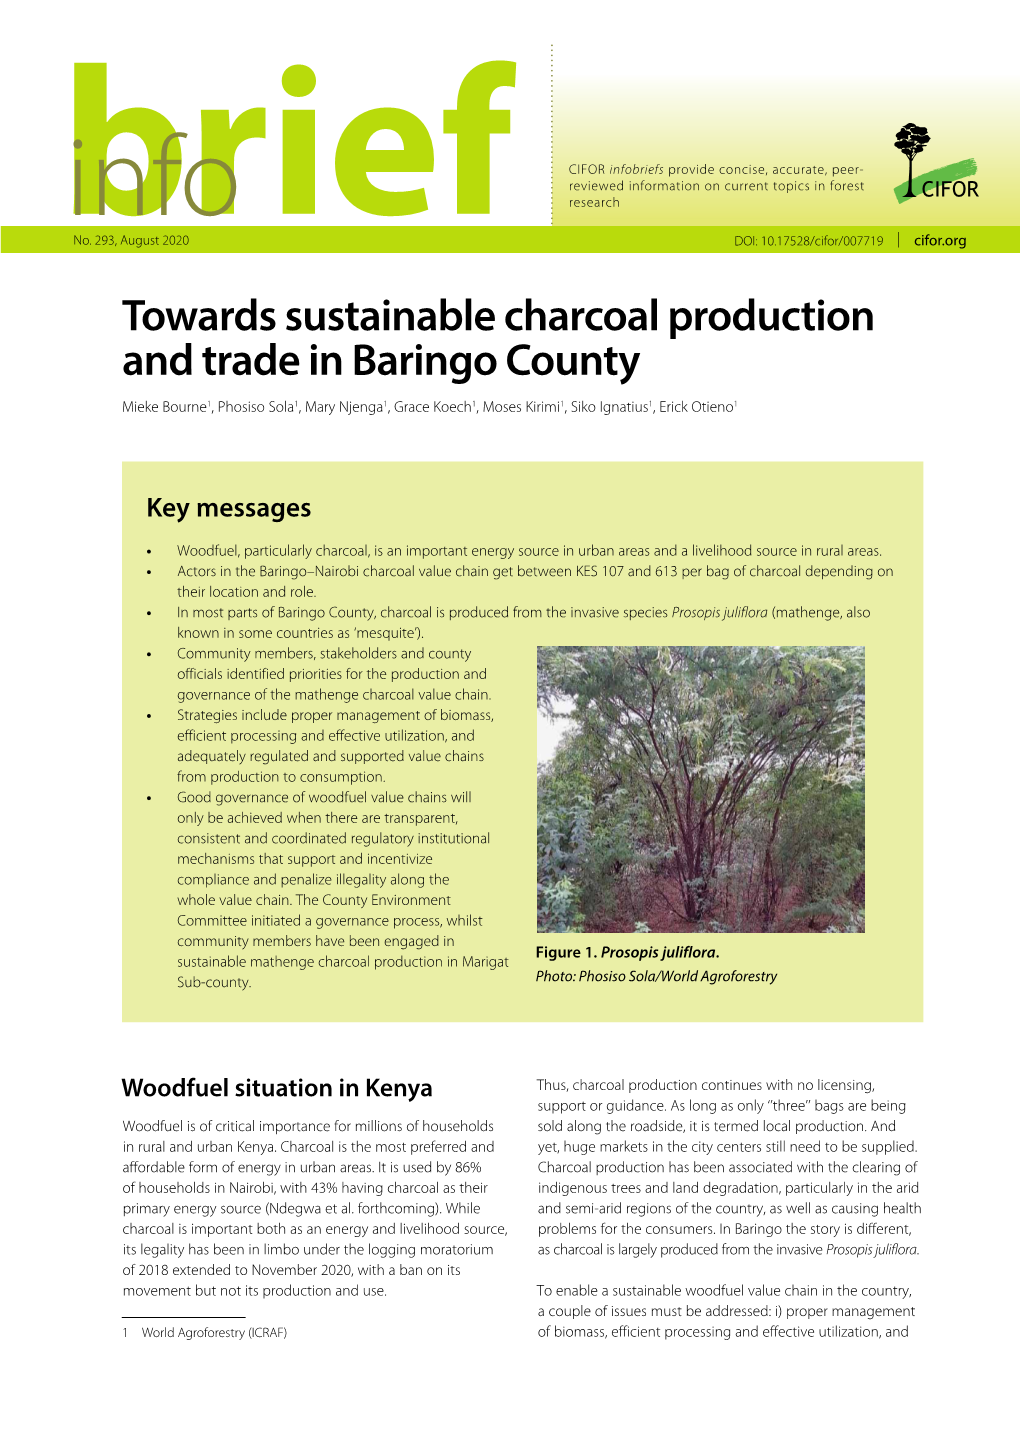 Towards Sustainable Charcoal Production and Trade in Baringo